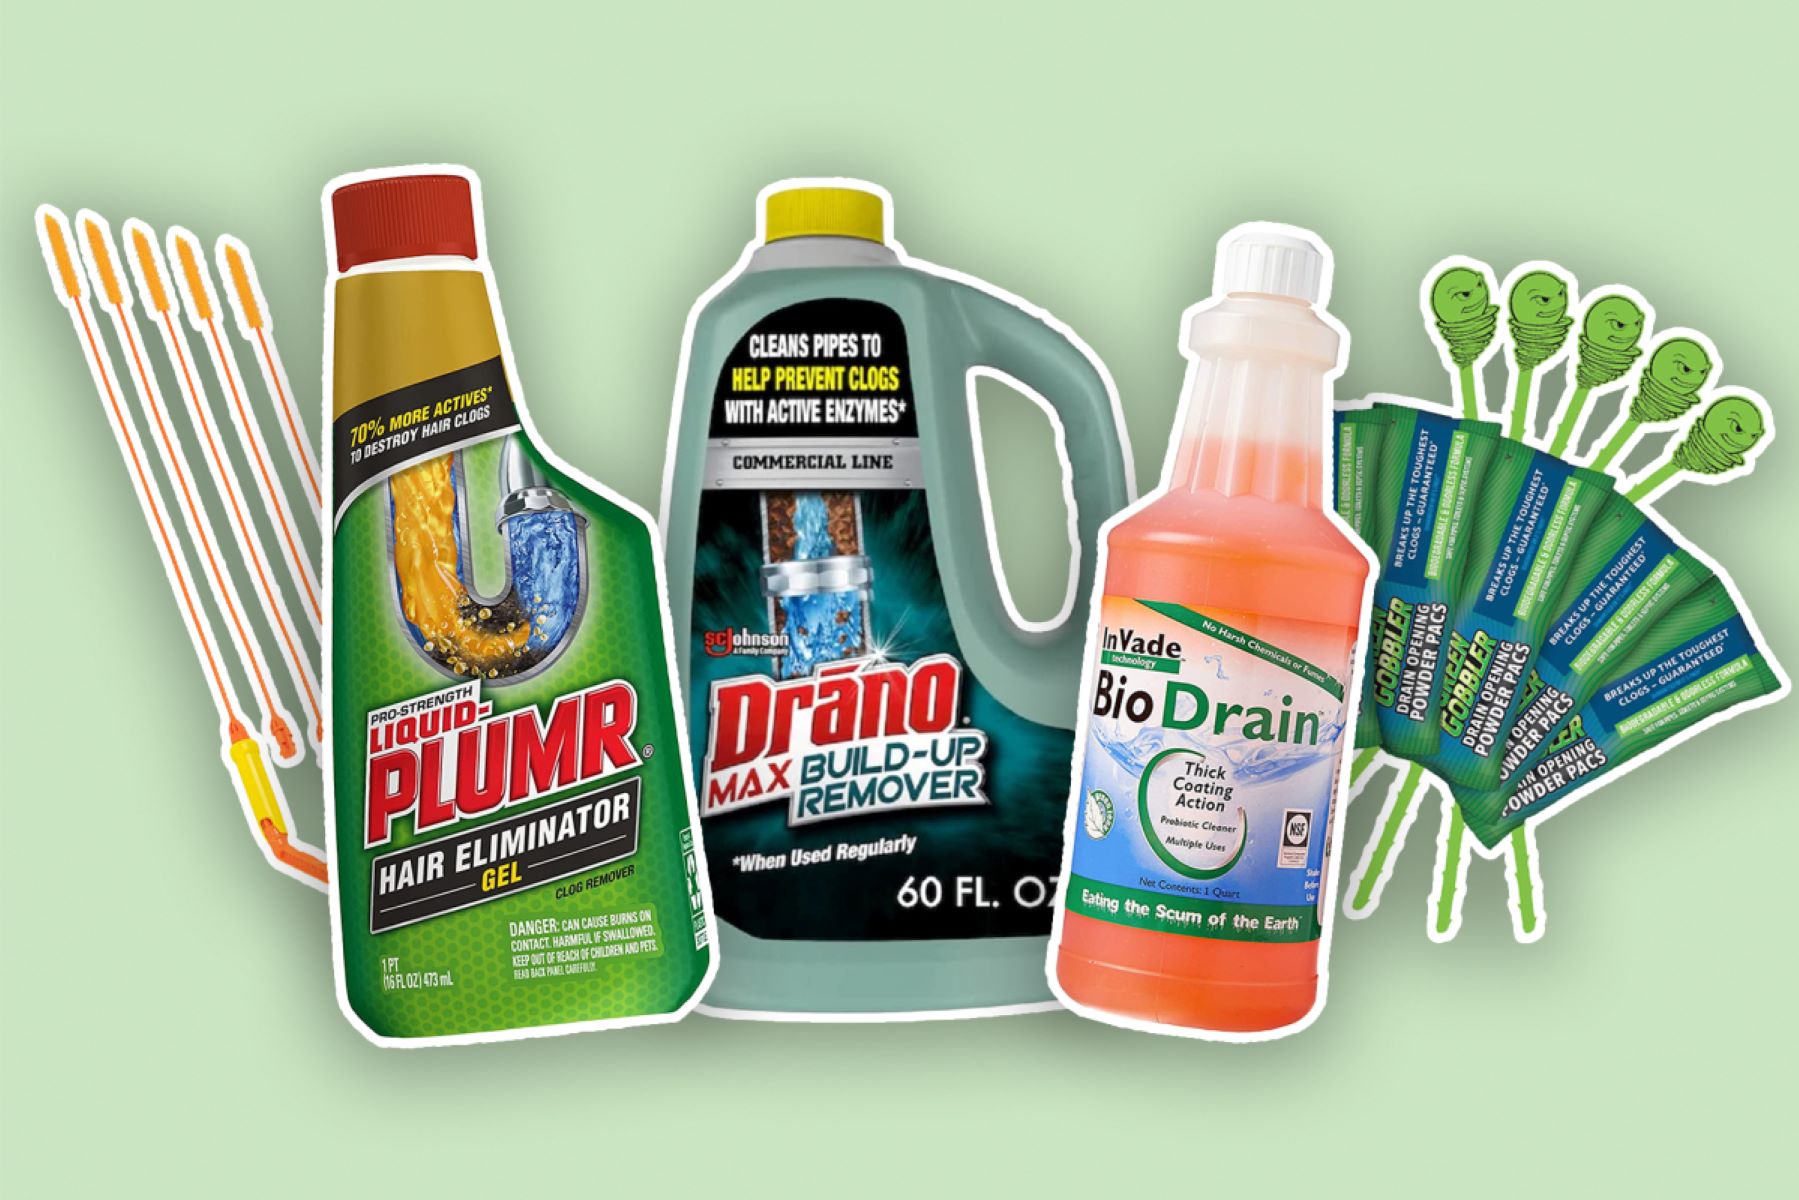 Bioda Drain Cleaner and Odor Eliminator, Enzyme drain cleaner, Drain clog  remover